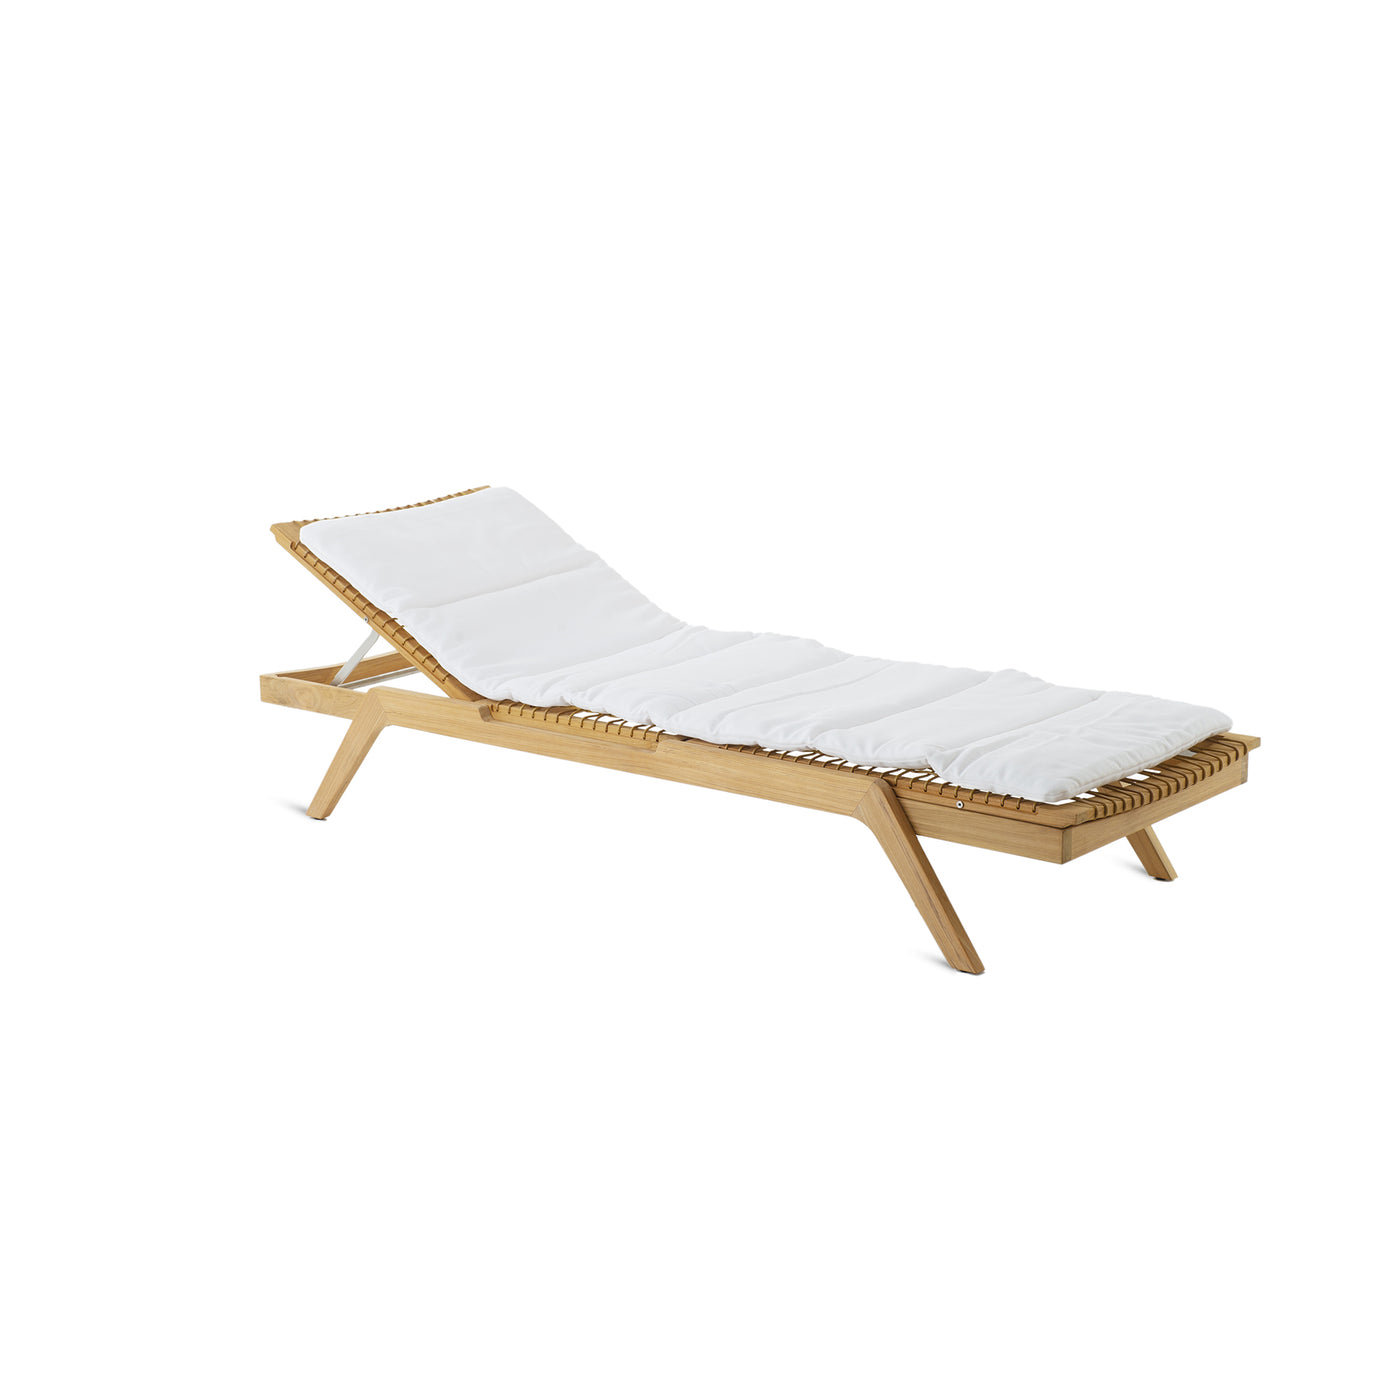 SYNTHESIS stackable sunlounger